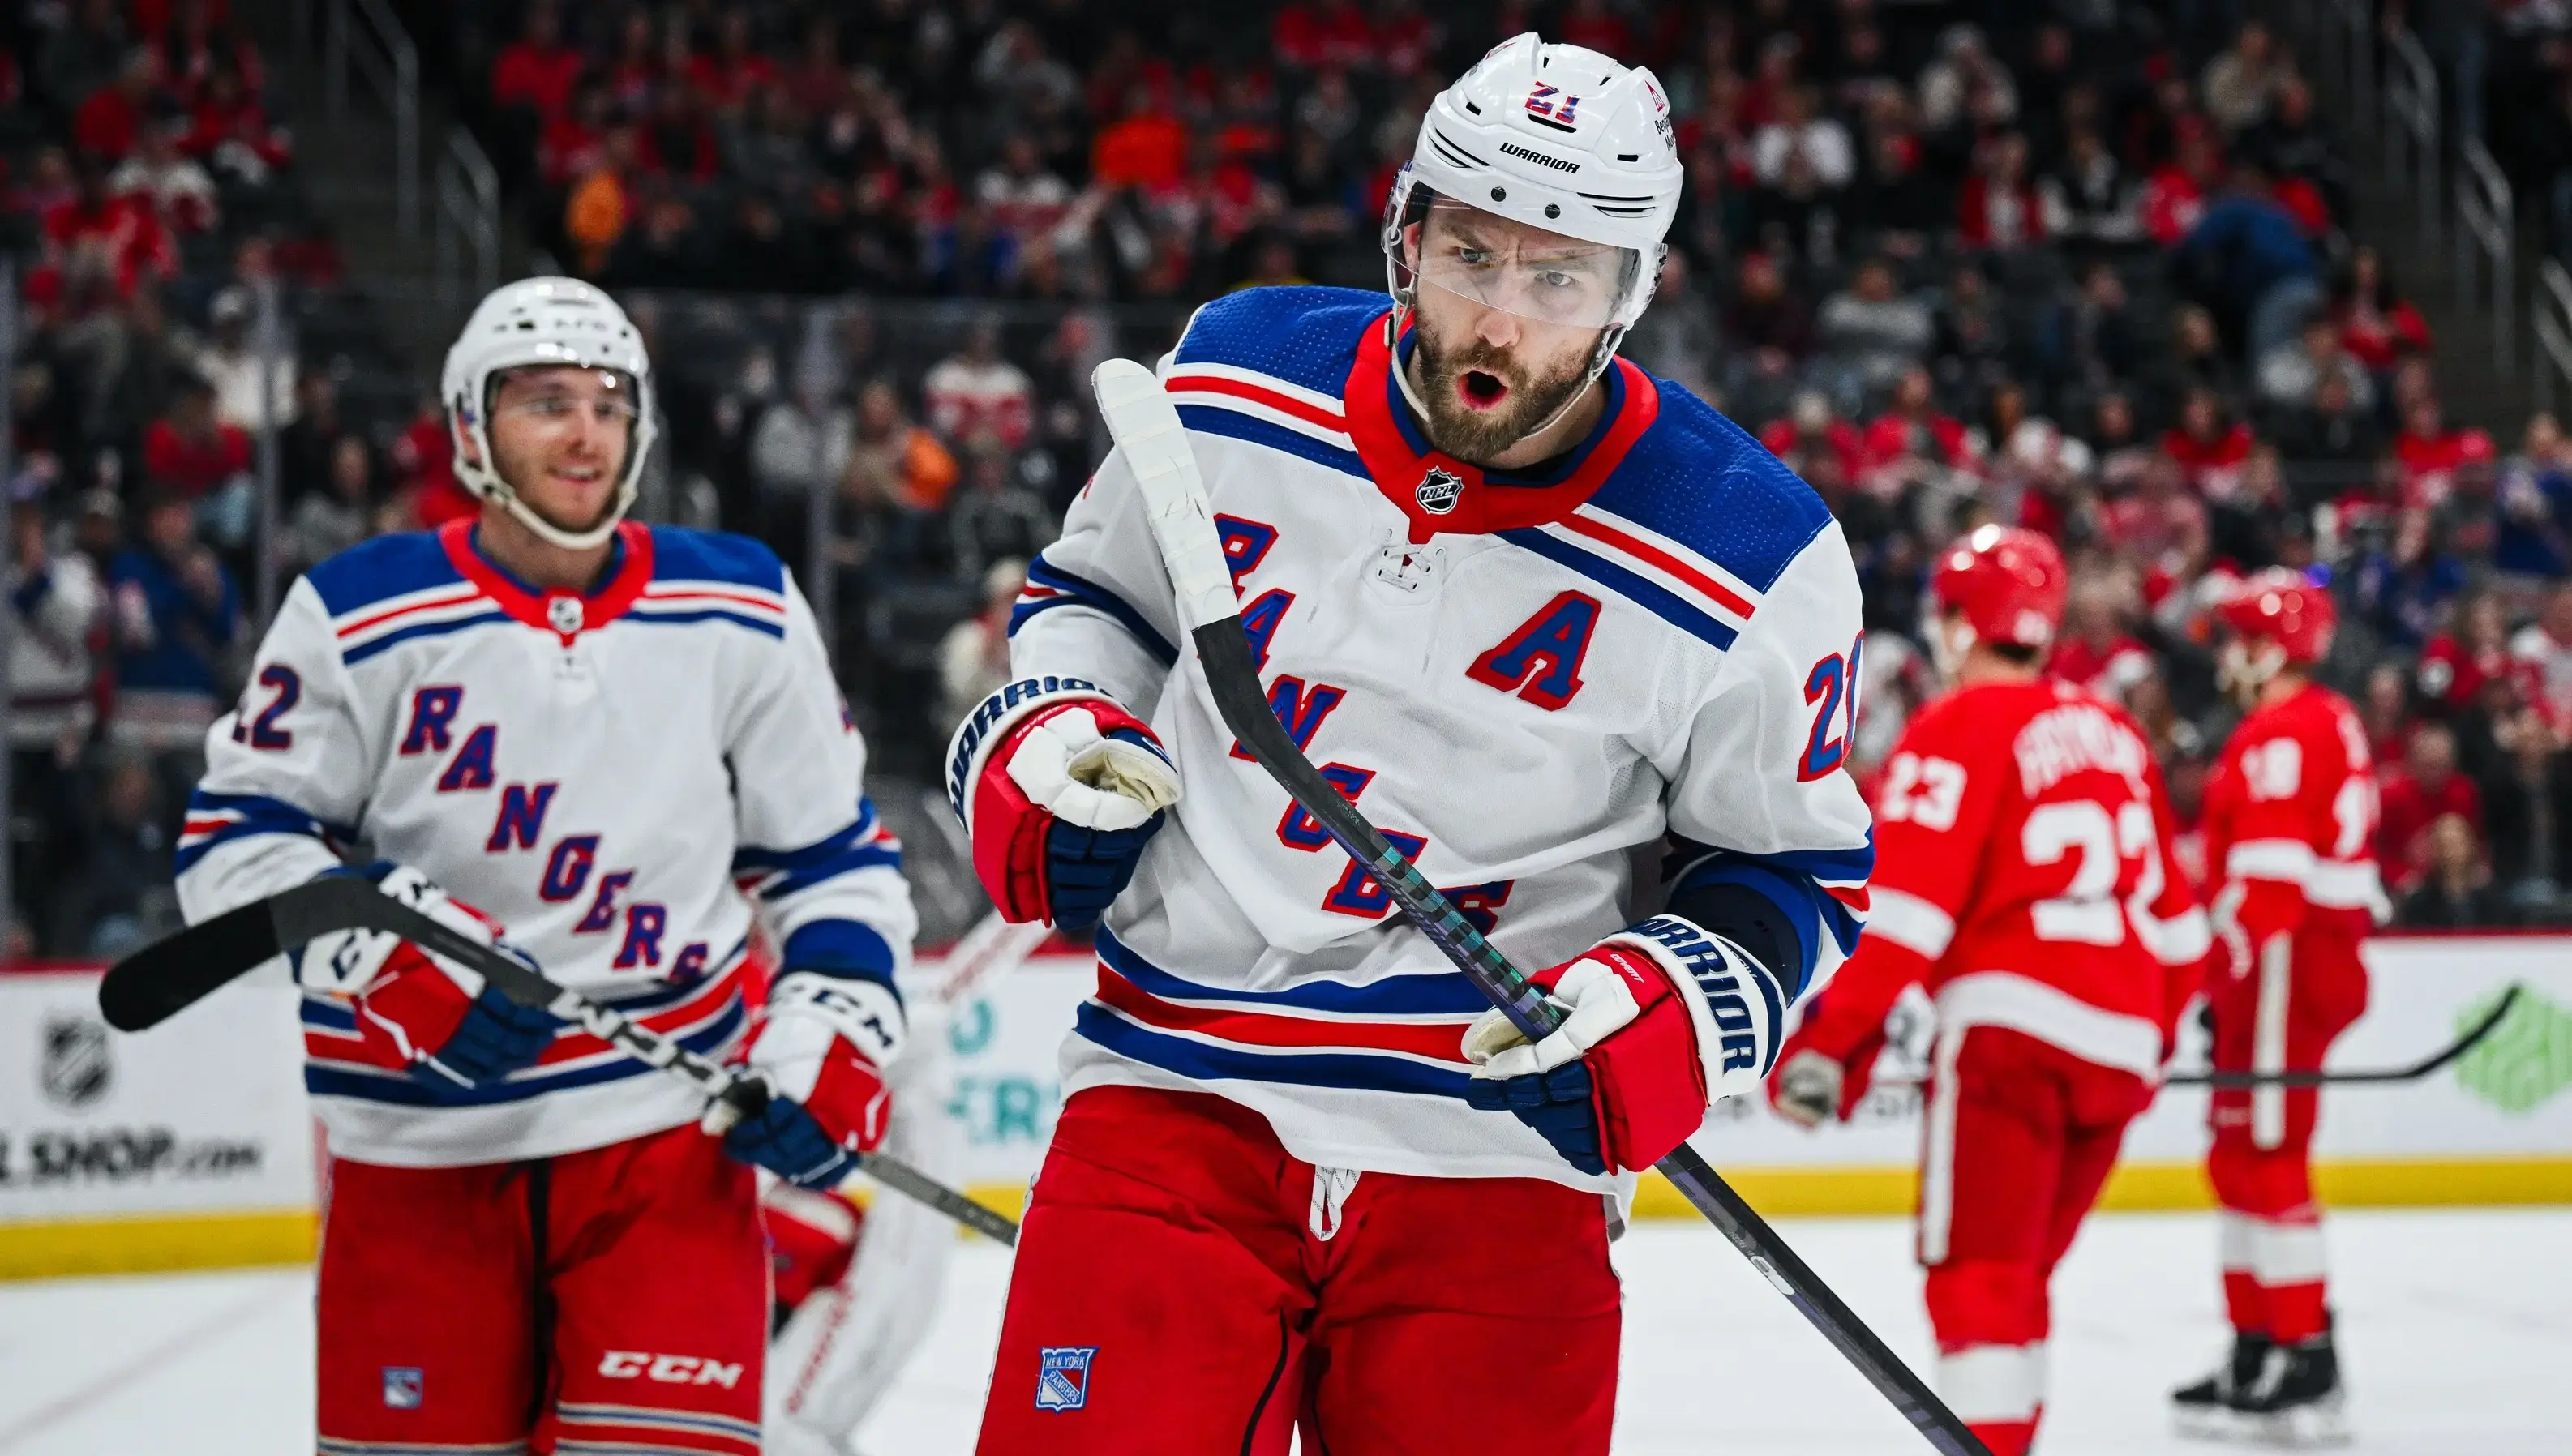 New York Rangers center Barclay Goodrow (21) celebrates his goal with center Jonny Brodzinski (22) during the first period against the Detroit Red Wings at Little Caesars Arena. / Tim Fuller-USA TODAY Sports